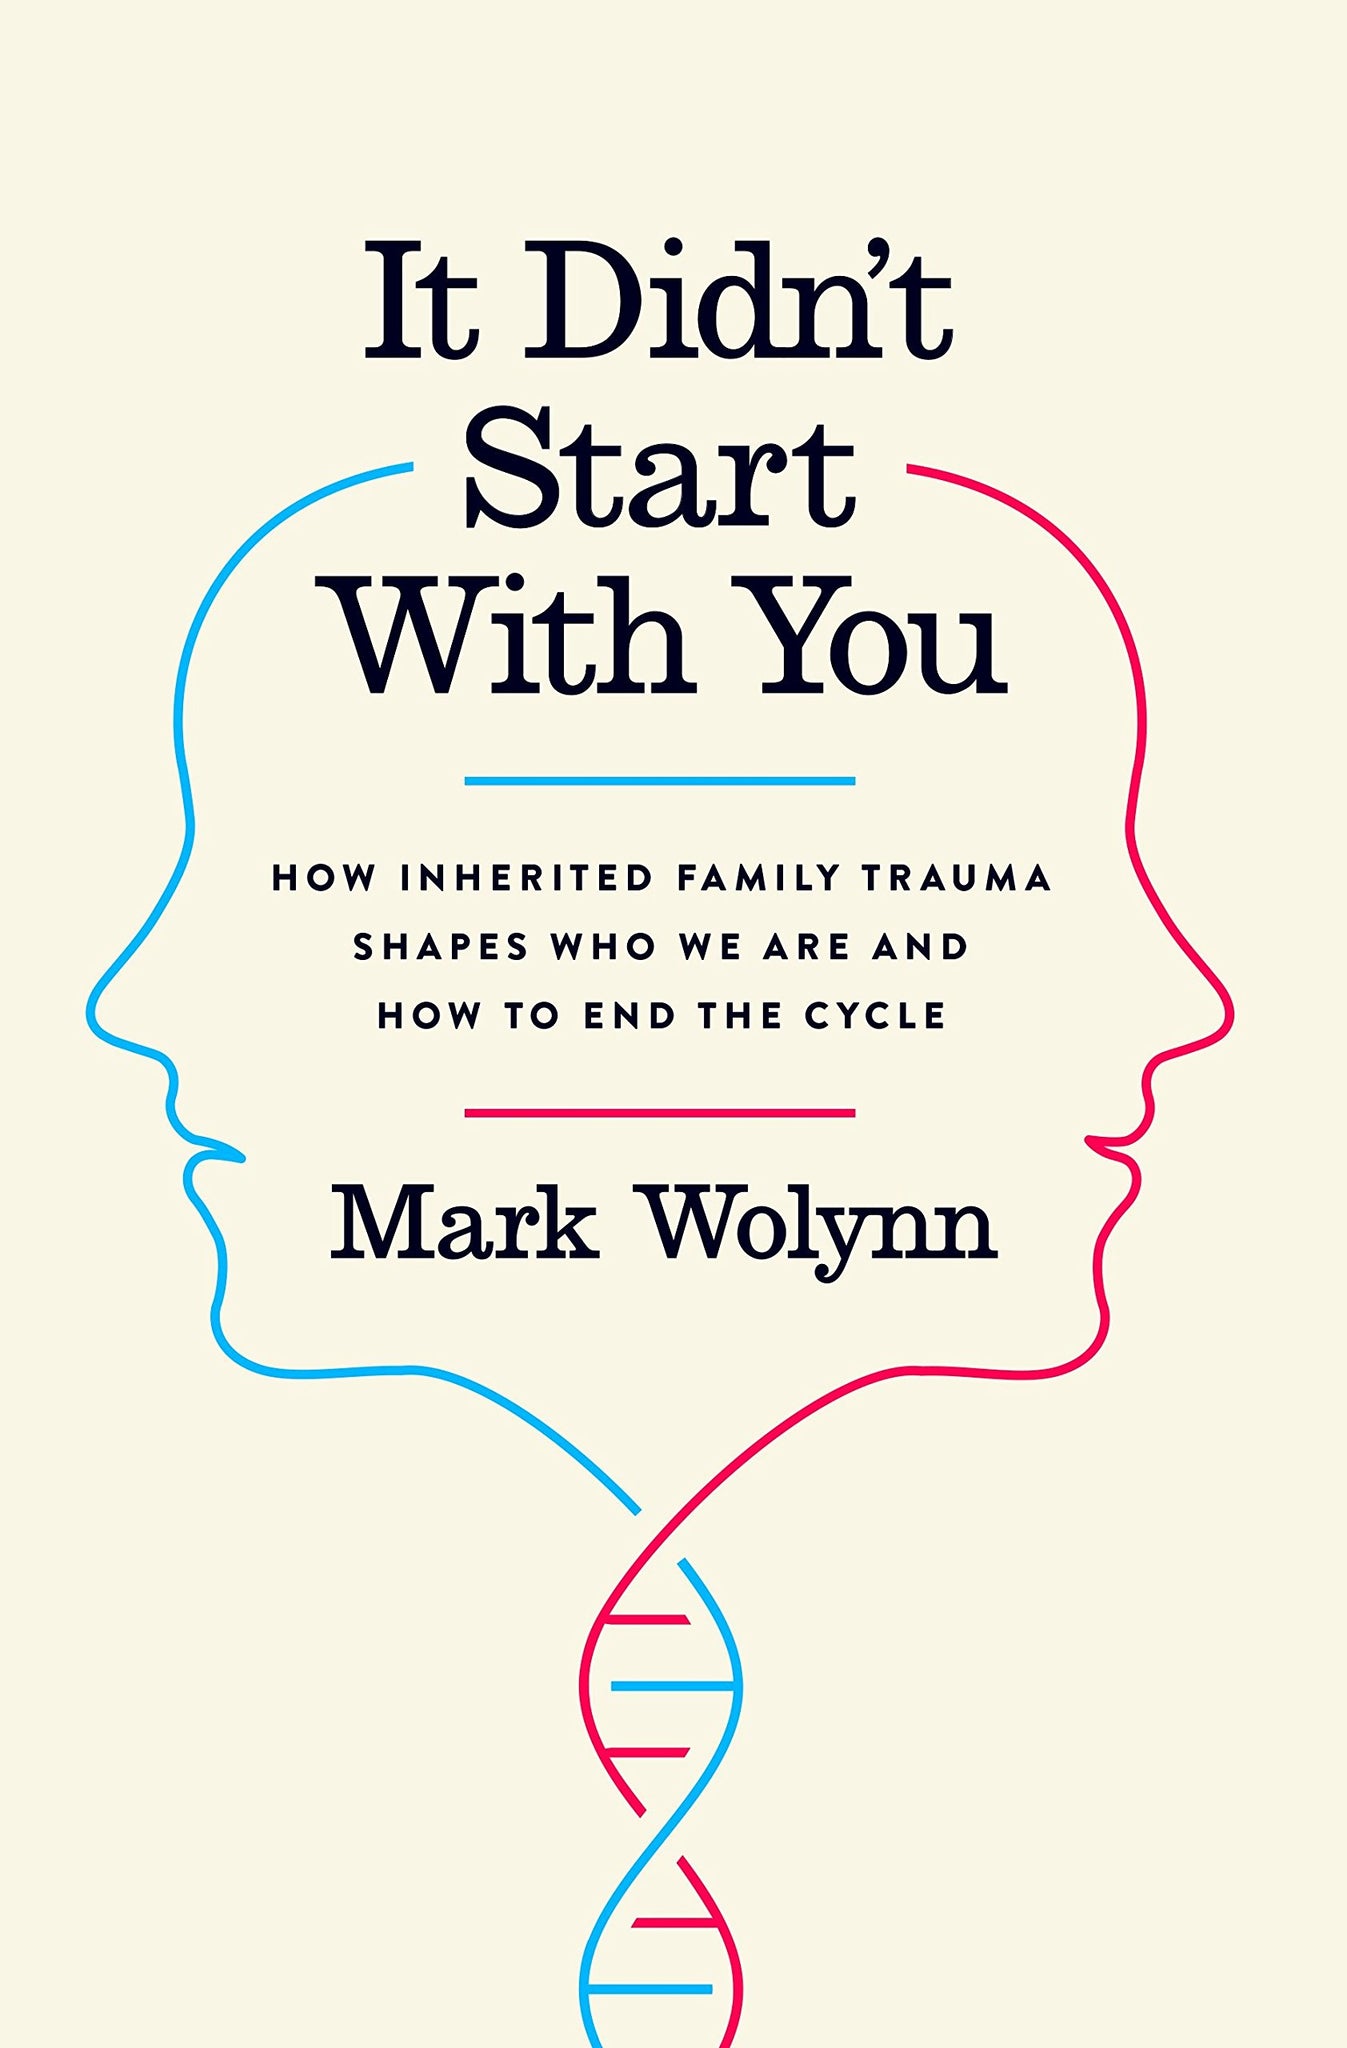 It Didn't Start with You by Mark Wolynn